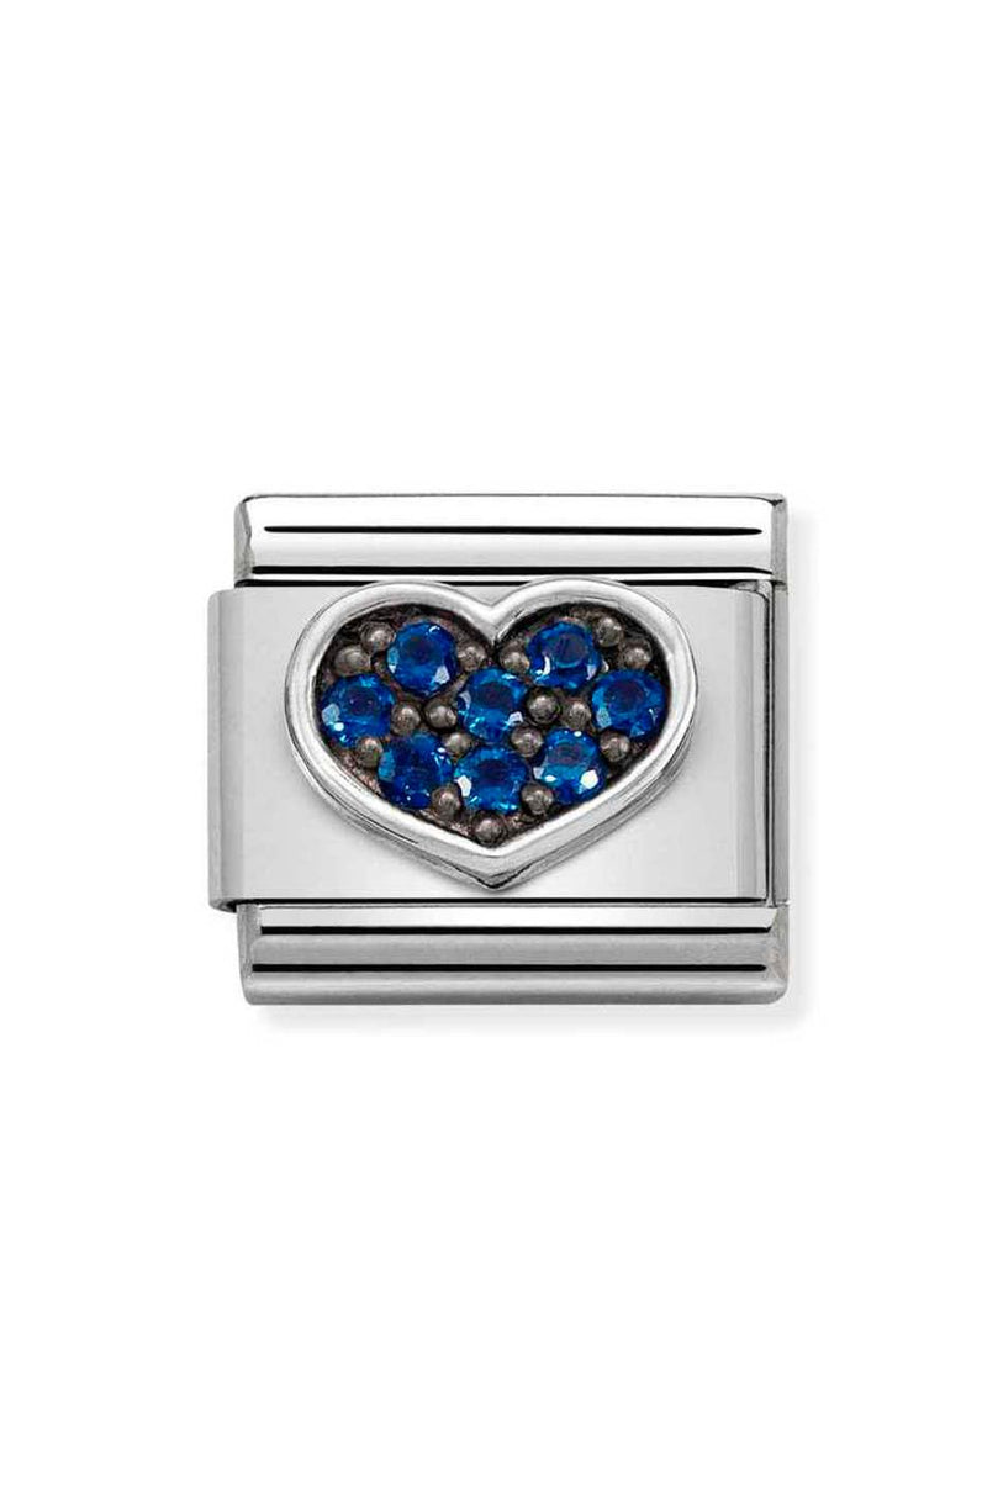 Oxidised symbols 925 sterling silver and CZ Blue Heart